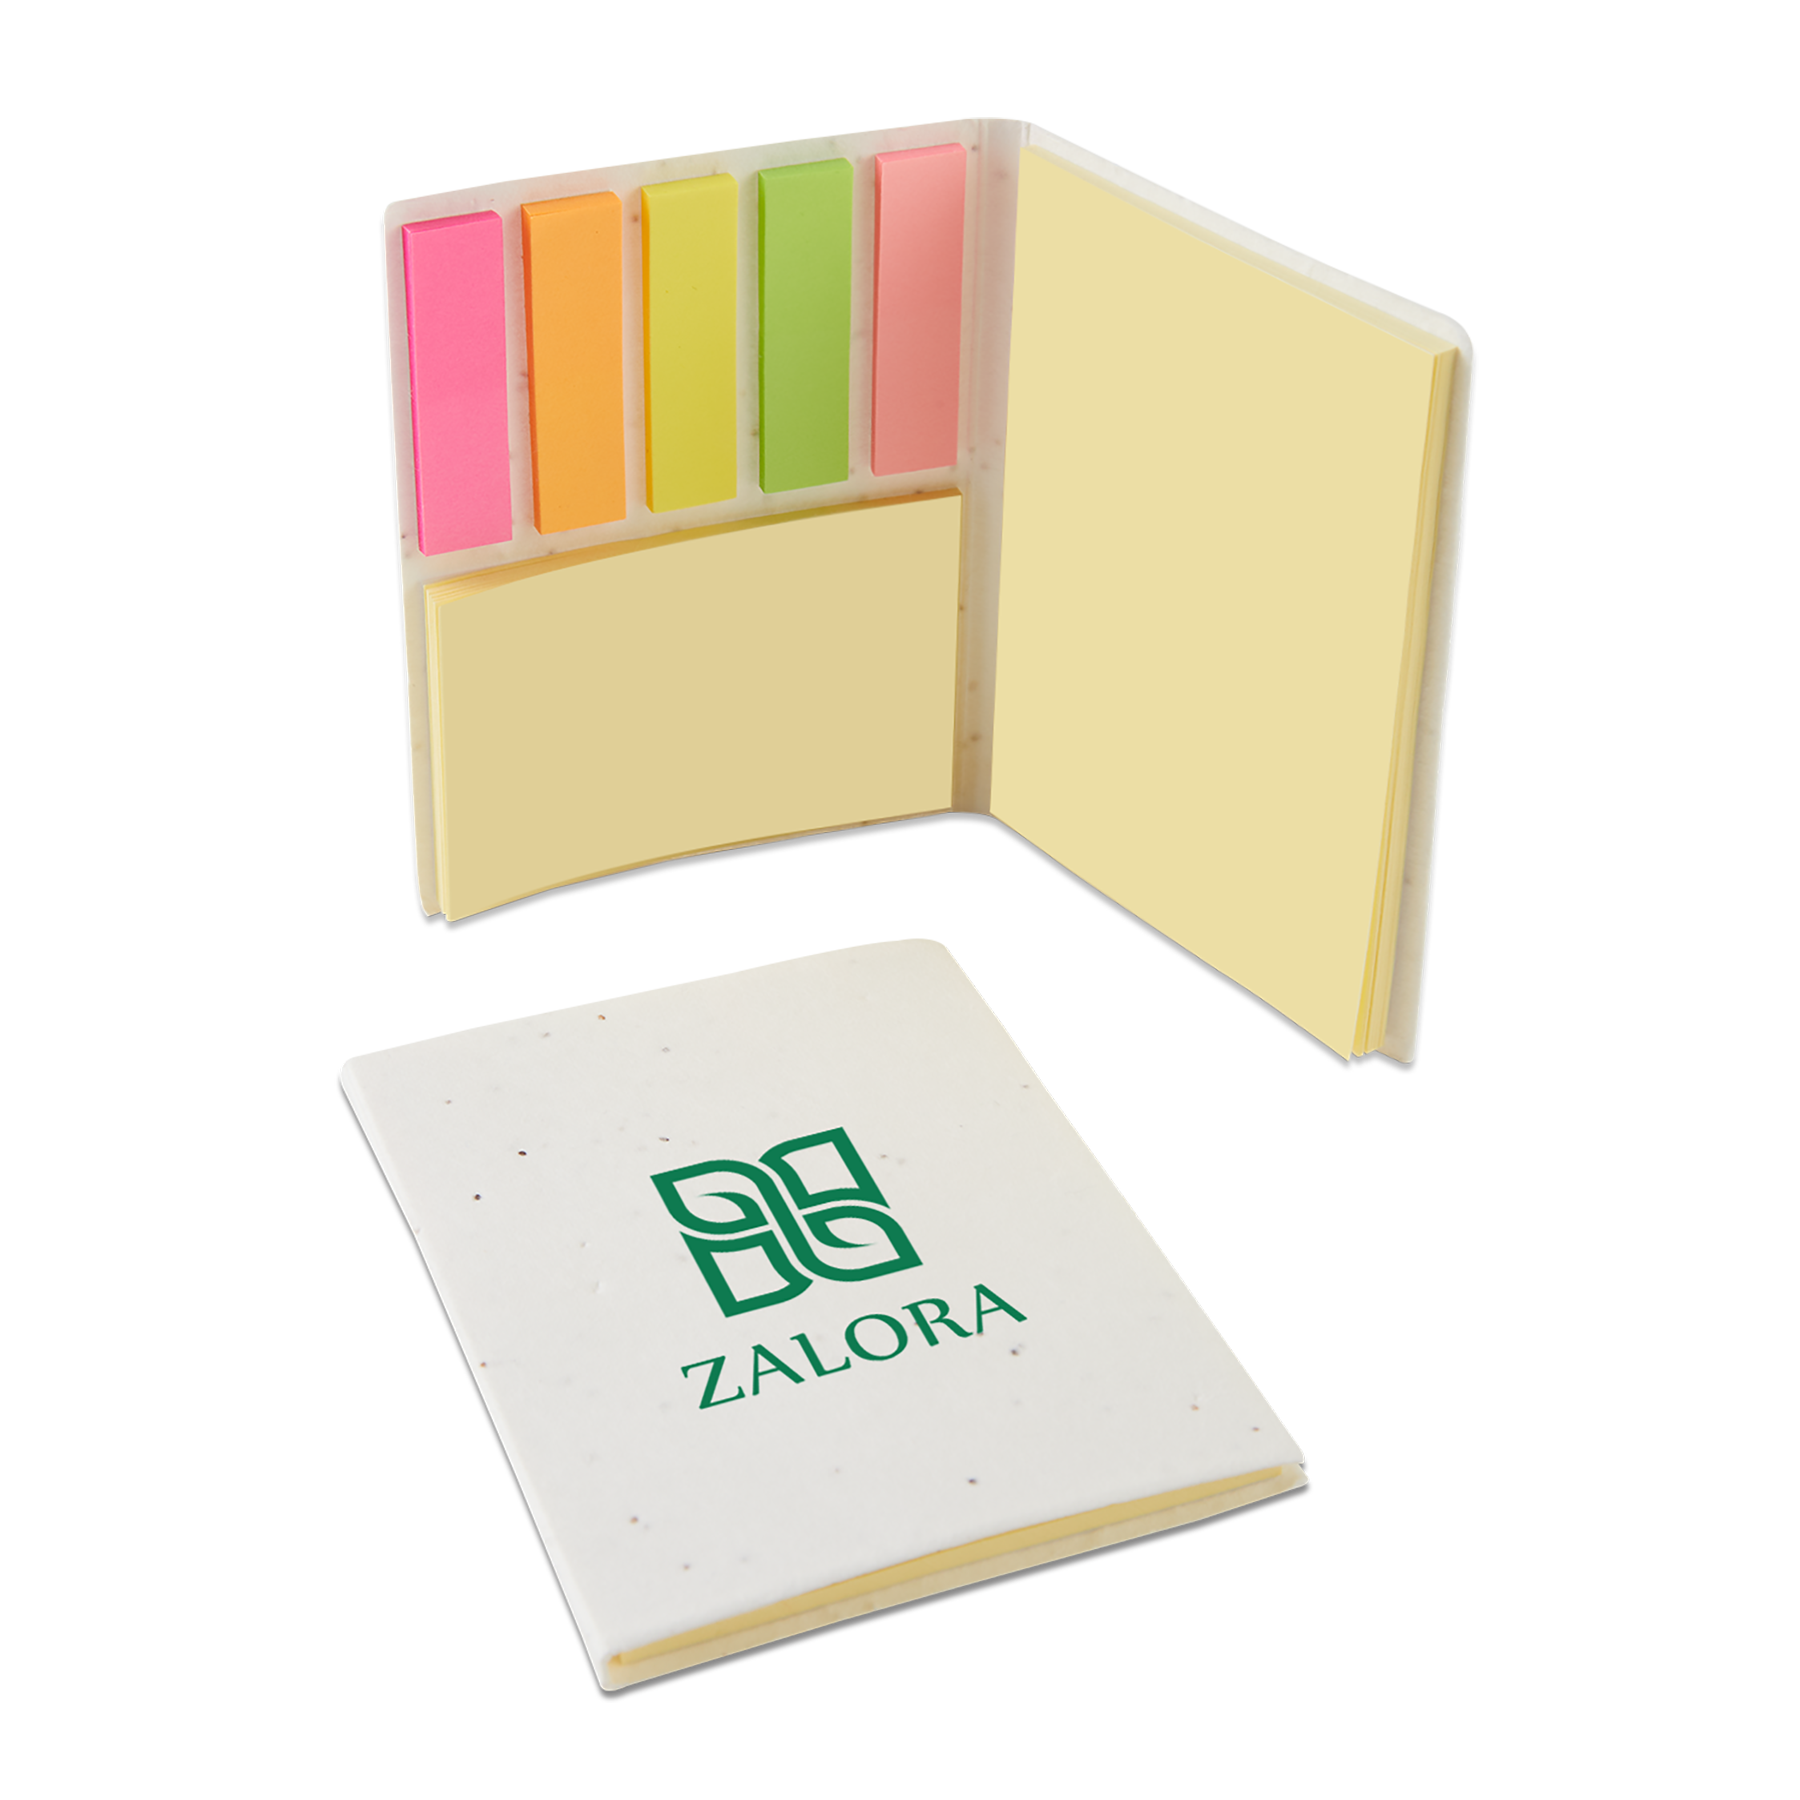 Seed Card Sticky Notepad